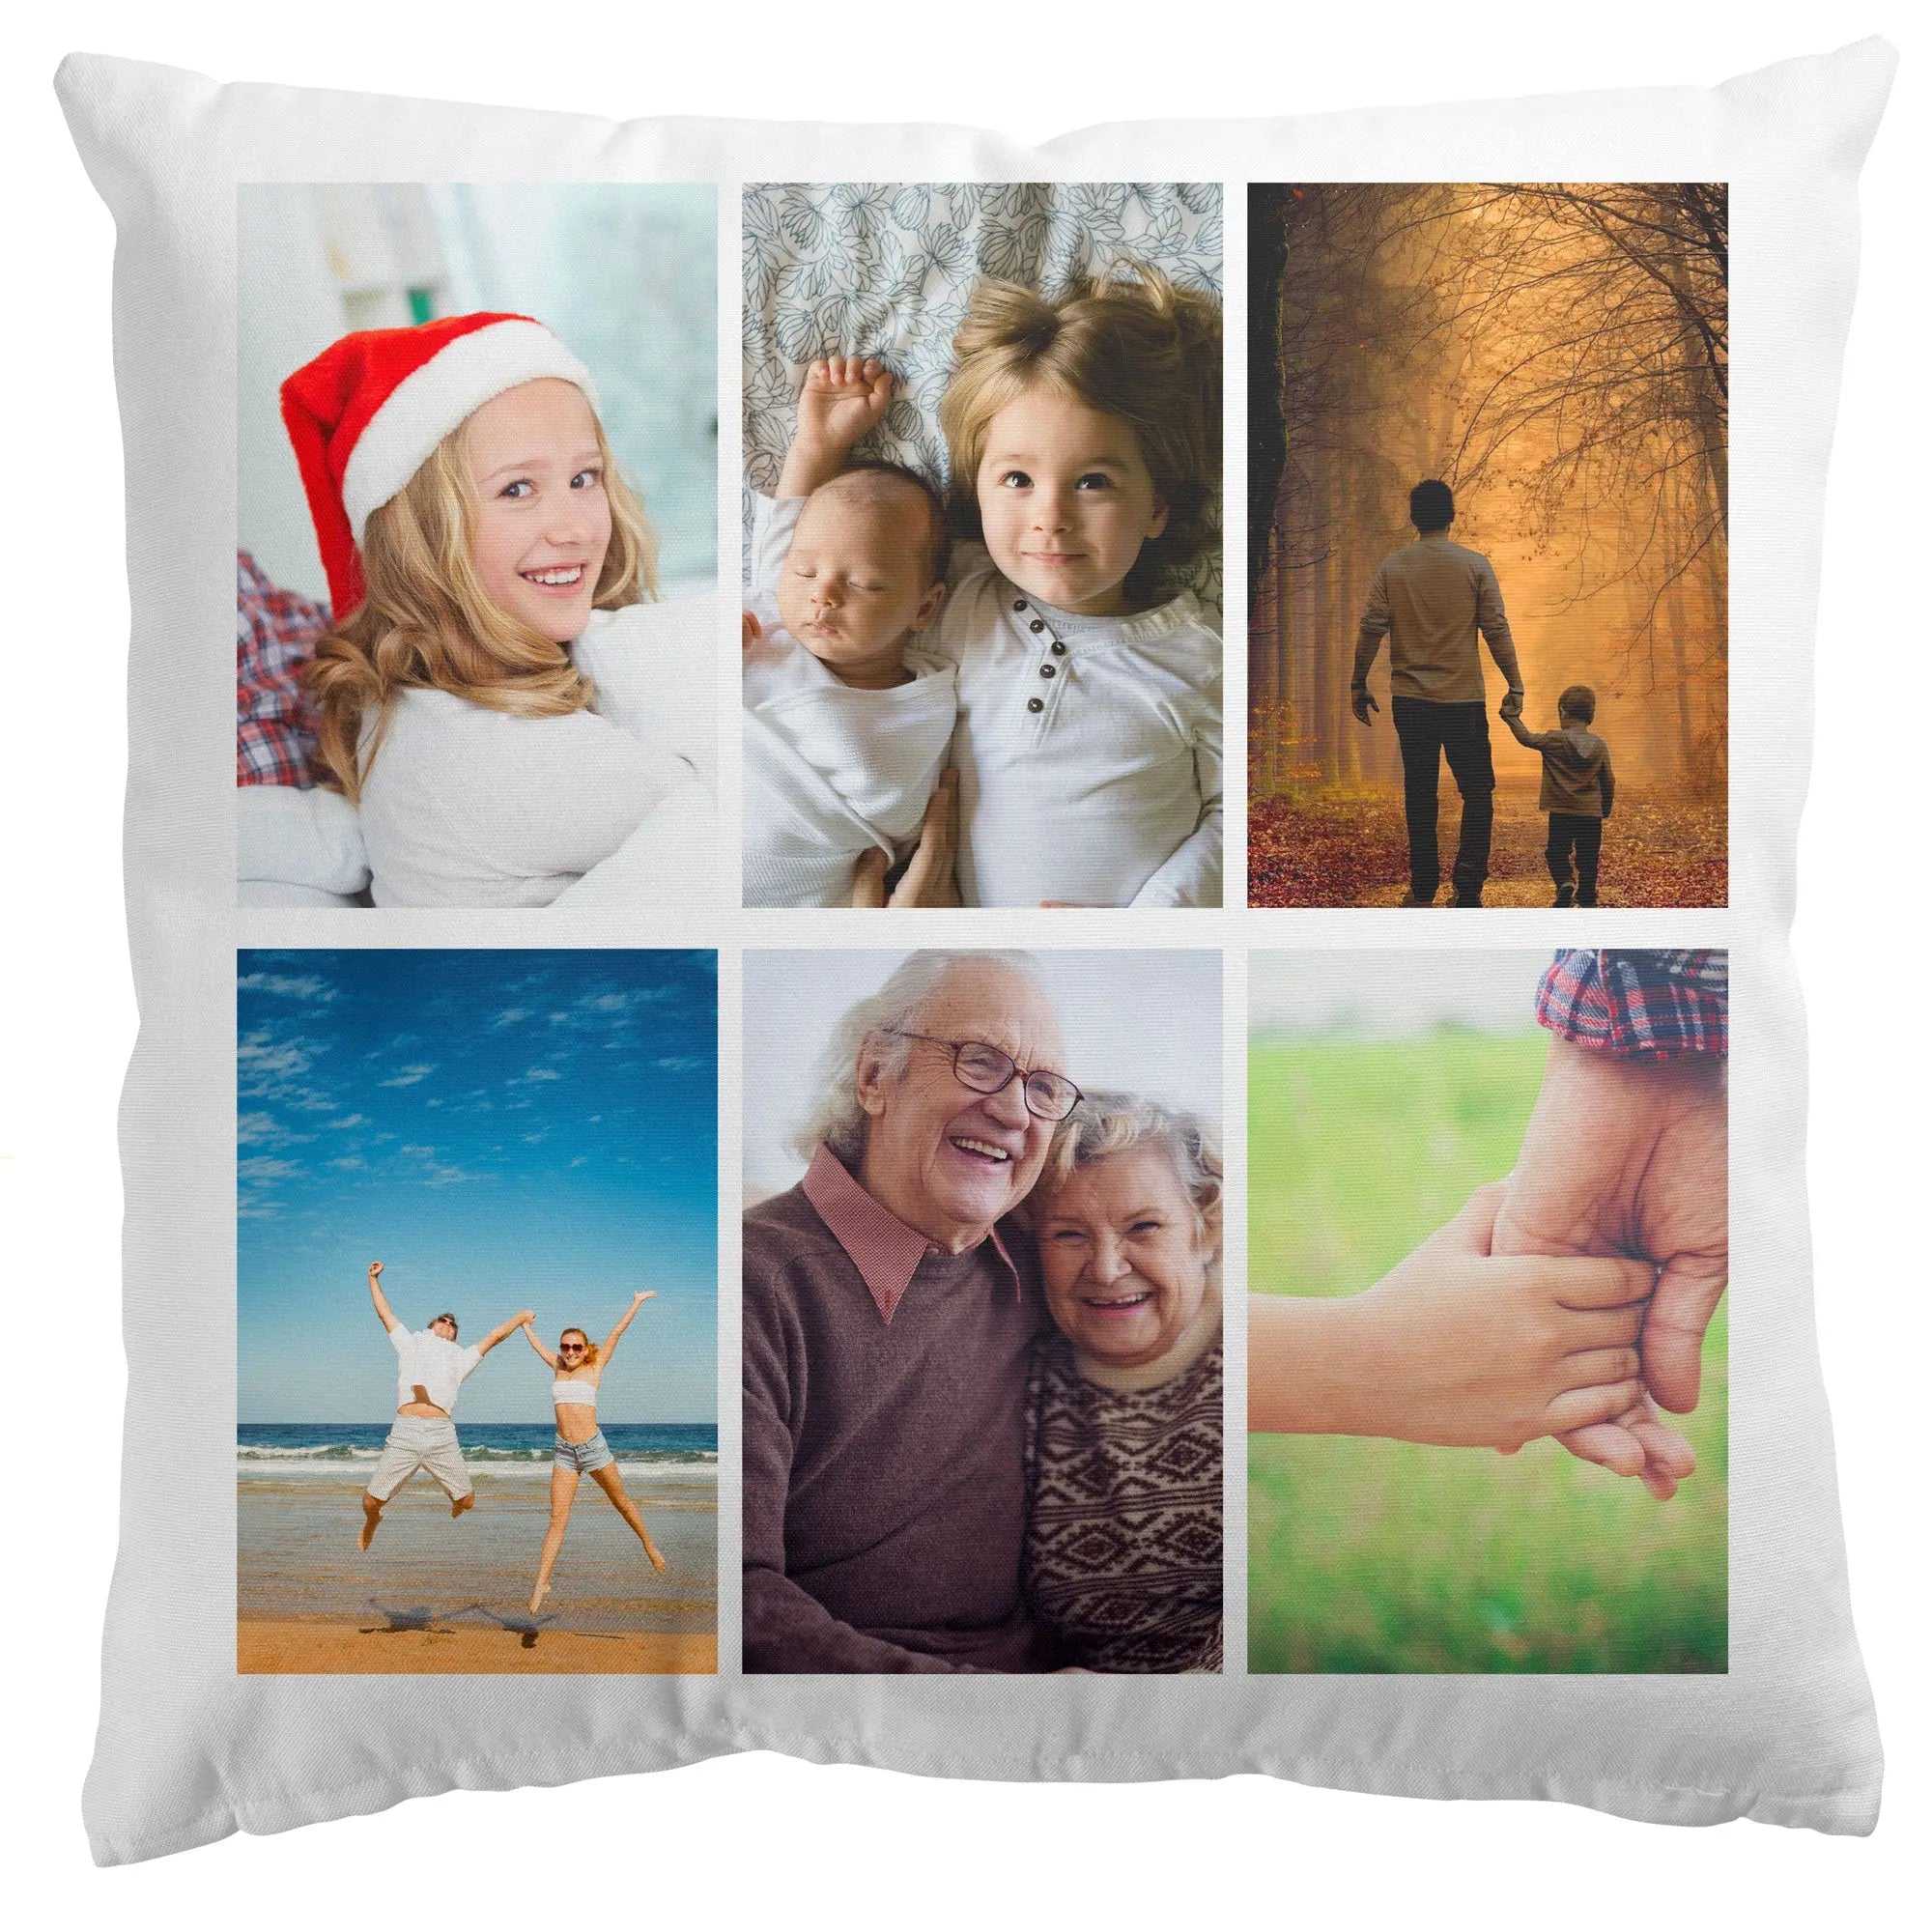 Personalised Collage Style  Cushion Cover  40x40cm  Photo Cushion - 6 Images - CushionPop